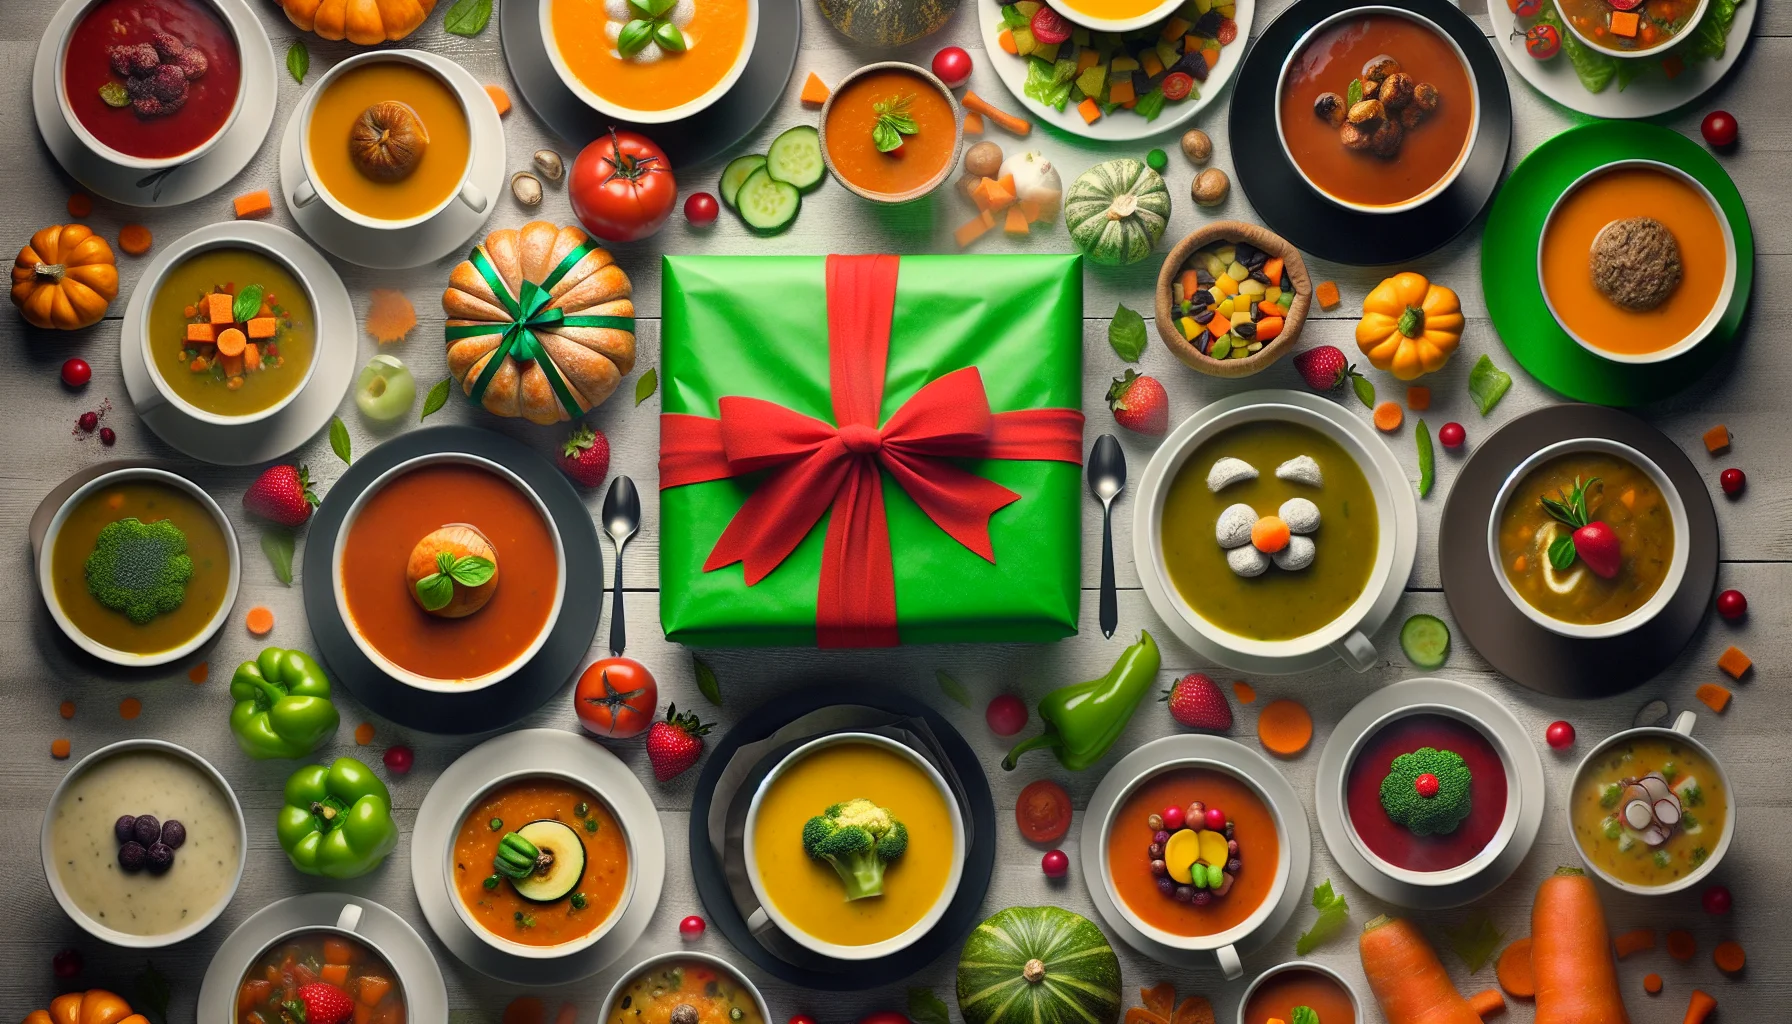 Envision a captivating and humorous scene filled with steaming bowls of healthy vegetable soup. Various types of soups such as tomato, pumpkin, and lentil soup are beautifully arranged and presented as if they're having a party. In the middle, stands a surprise gift wrapped in bright, eco-friendly paper, with a big red bow on top. The gift tag humorously reads, 'Eat healthy for less, get a treat!' This thoughtful yet funny play implies that eating healthily can be inexpensive yet rewarding.